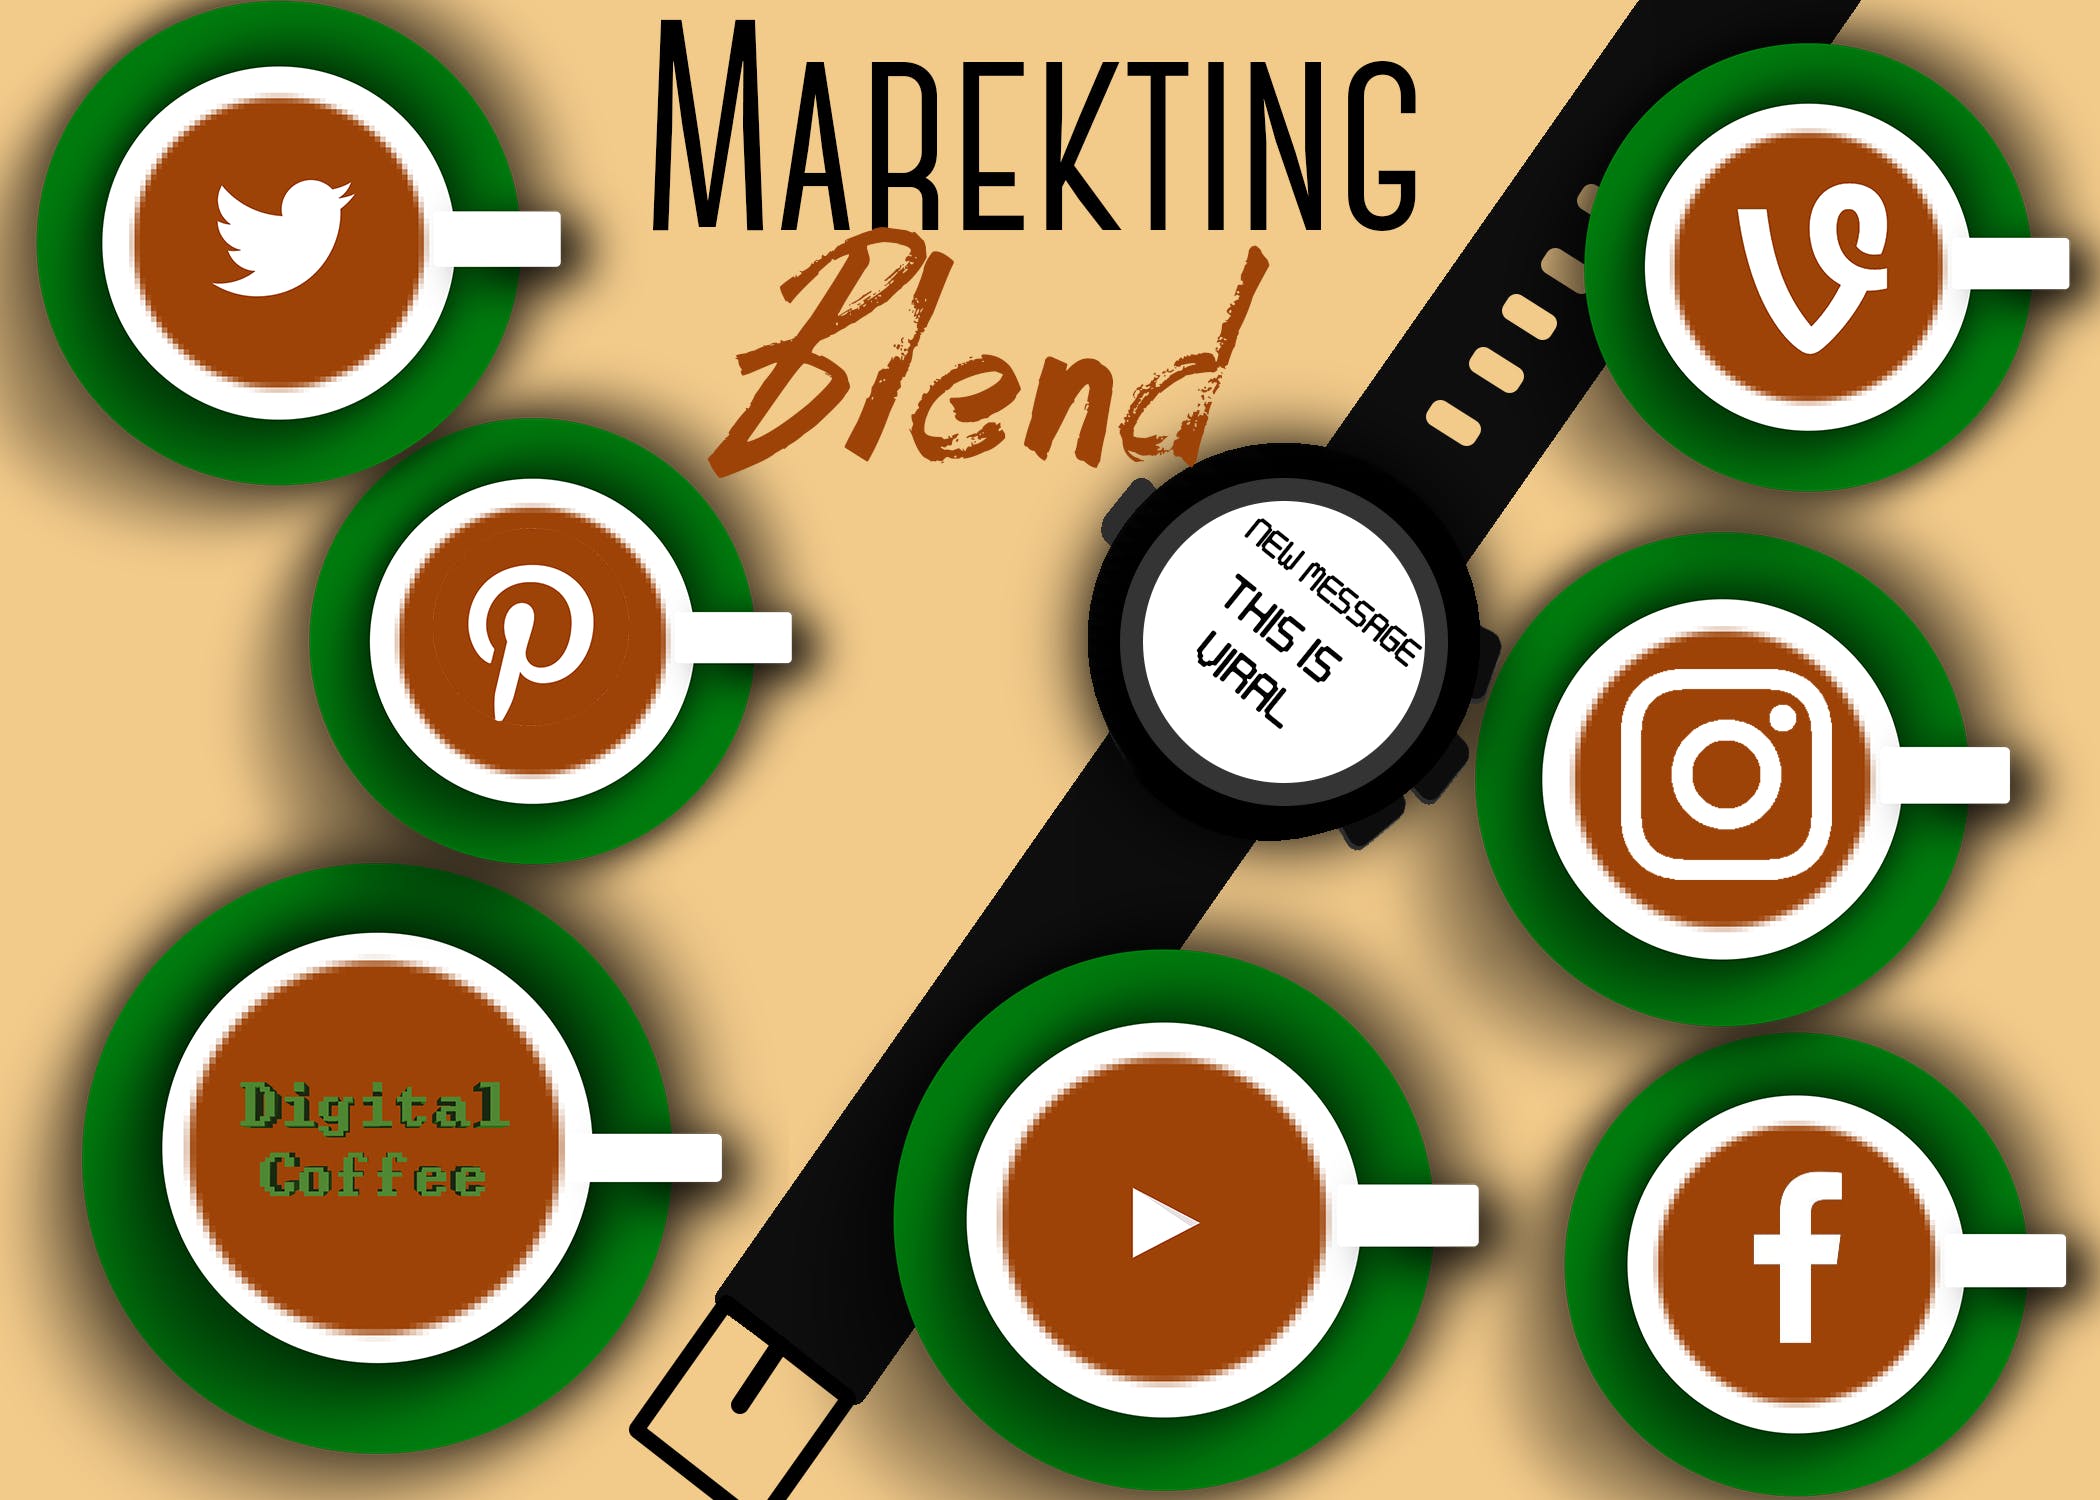 Marketing Blend - You can make viral videos and why video matters on social media media 1